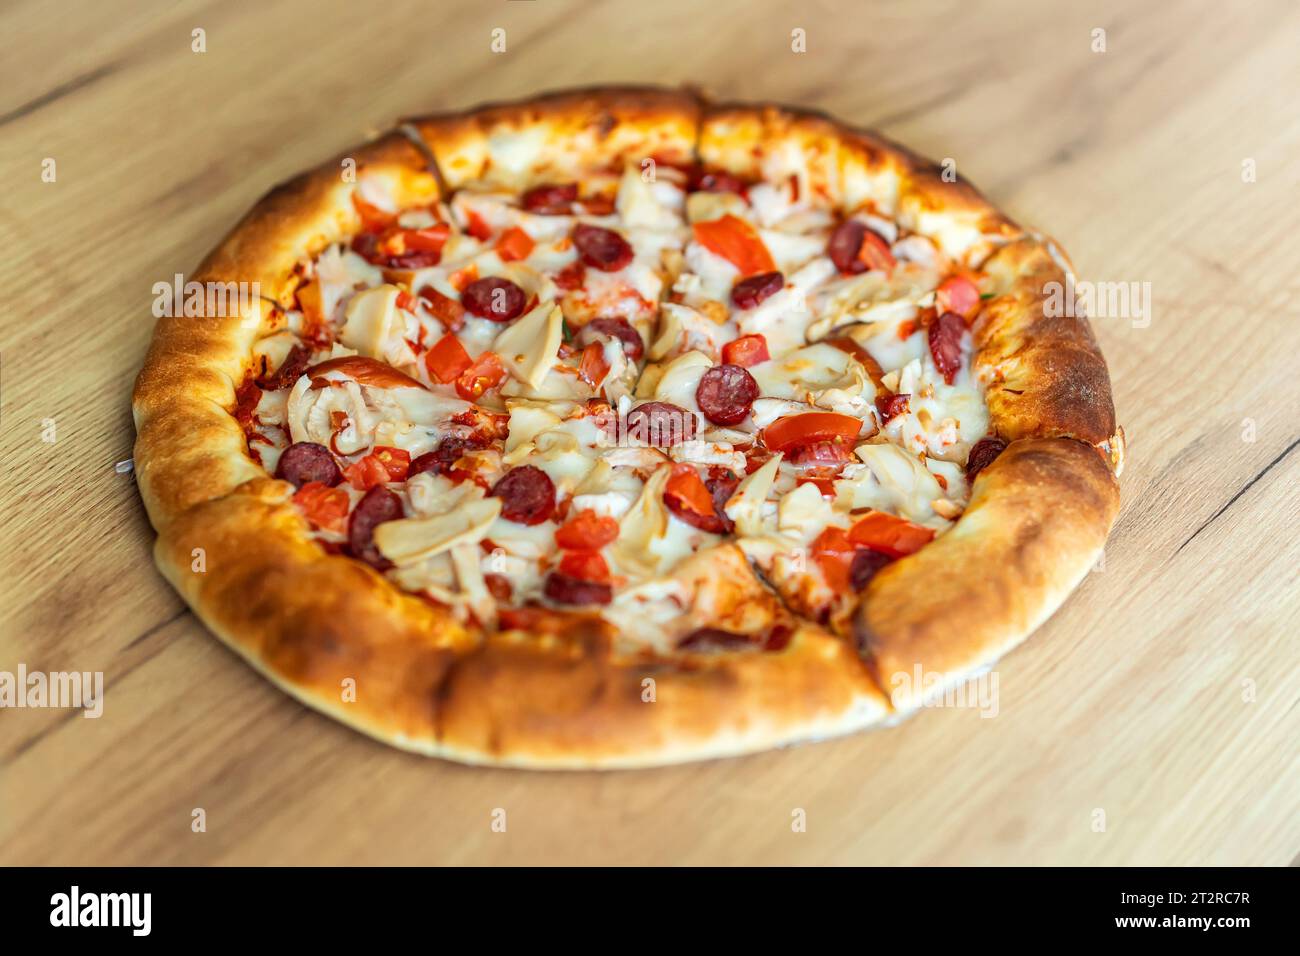 Pepperoni pizza on rustic, vintage style wood background. Top view Stock Photo